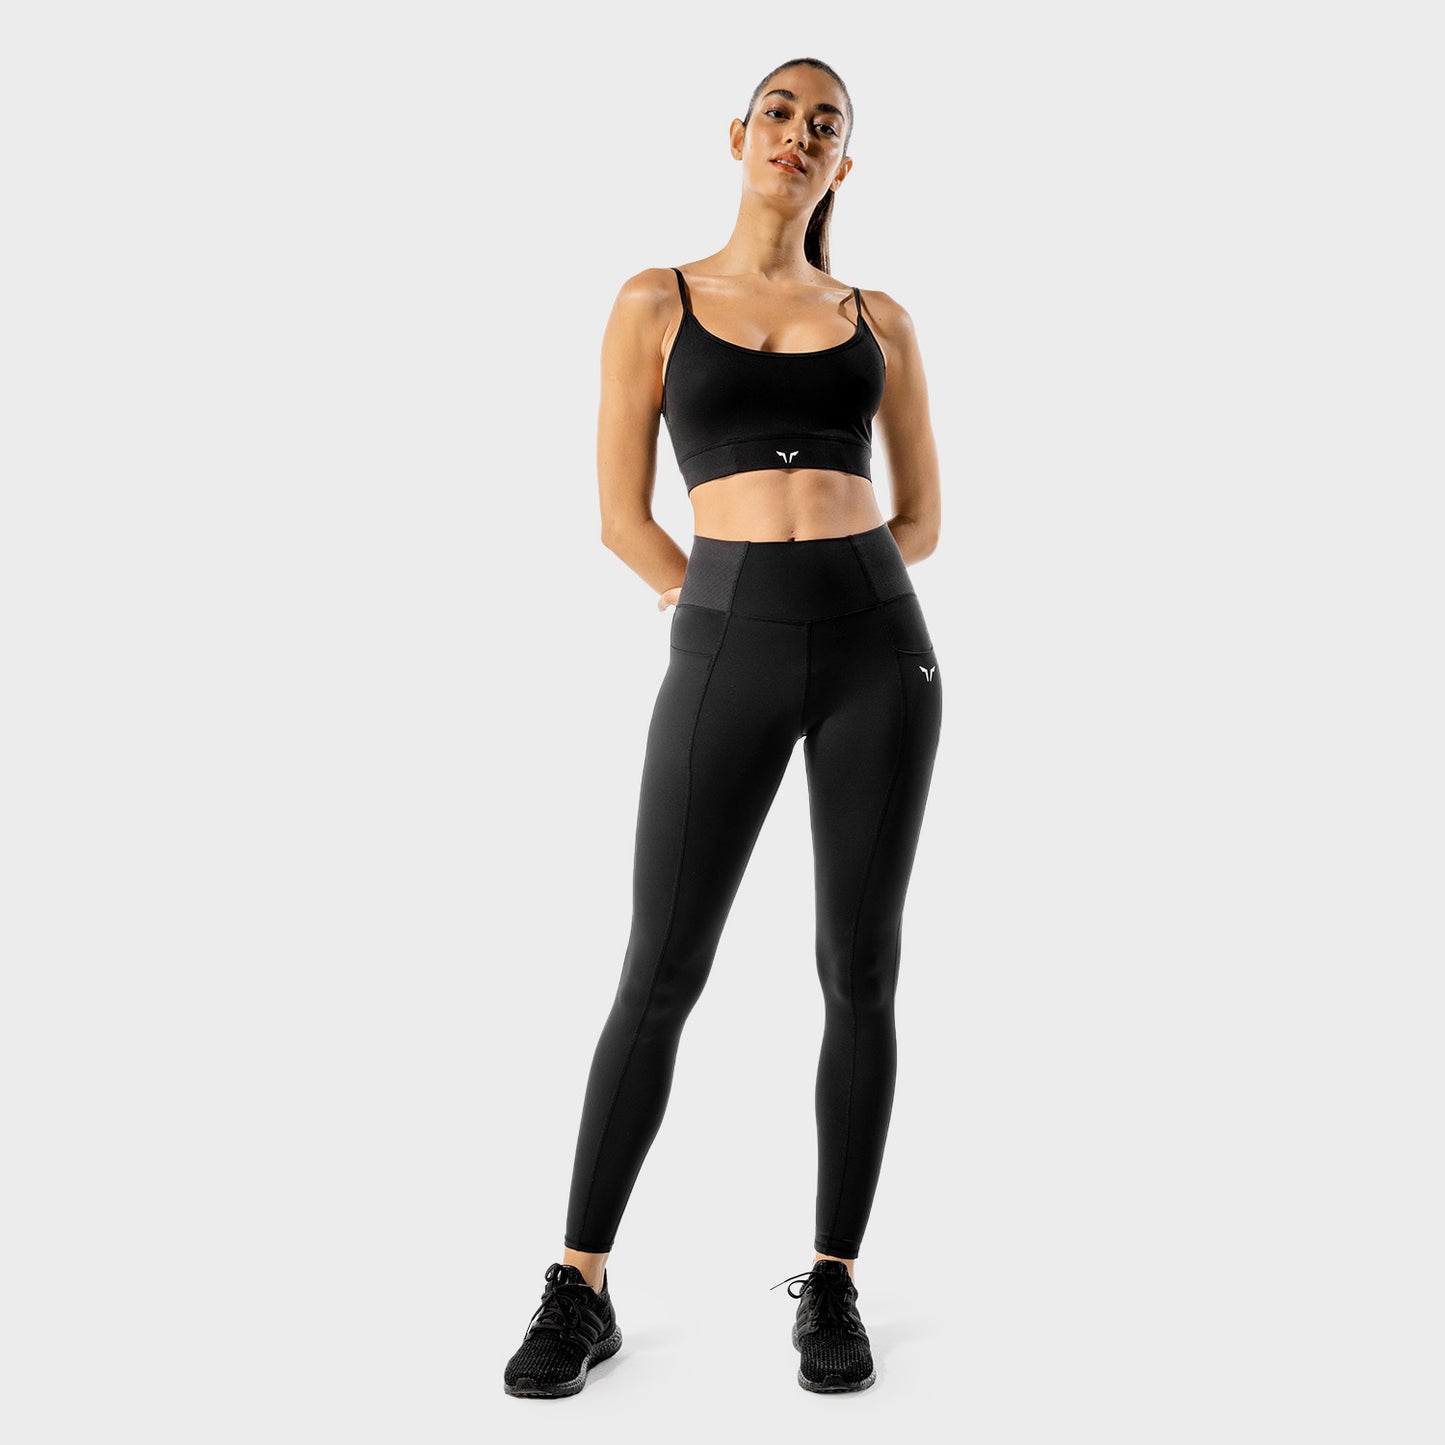 squatwolf-workout-clothes-core-training-bra-black-sports-bra-for-gym